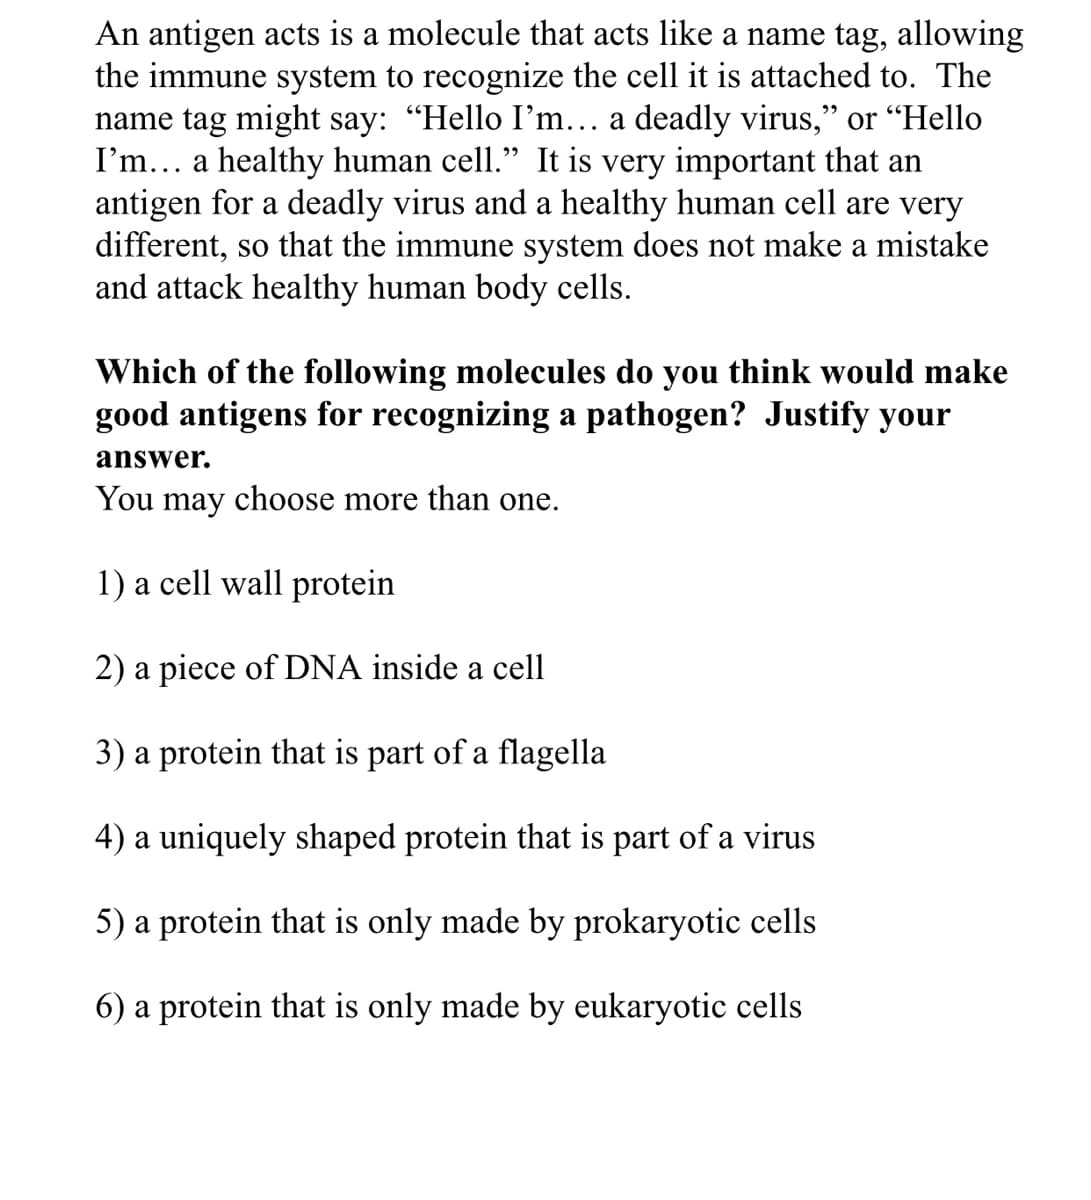 An antigen acts is a molecule that acts like a name tag, allowing
the immune system to recognize the cell it is attached to. The
name tag might say: "Hello I'm... a deadly virus," or “Hello
I'm... a healthy human cell." It is very important that an
antigen for a deadly virus and a healthy human cell are very
different, so that the immune system does not make a mistake
and attack healthy human body cells.
Which of the following molecules do you think would make
good antigens for recognizing a pathogen? Justify your
answer.
You may choose more than one.
1) a cell wall protein
2) a piece of DNA inside a cell
3) a protein that is part of a flagella
4) a uniquely shaped protein that is part of a virus
5) a protein that is only made by prokaryotic cells
6) a protein that is only made by eukaryotic cells
